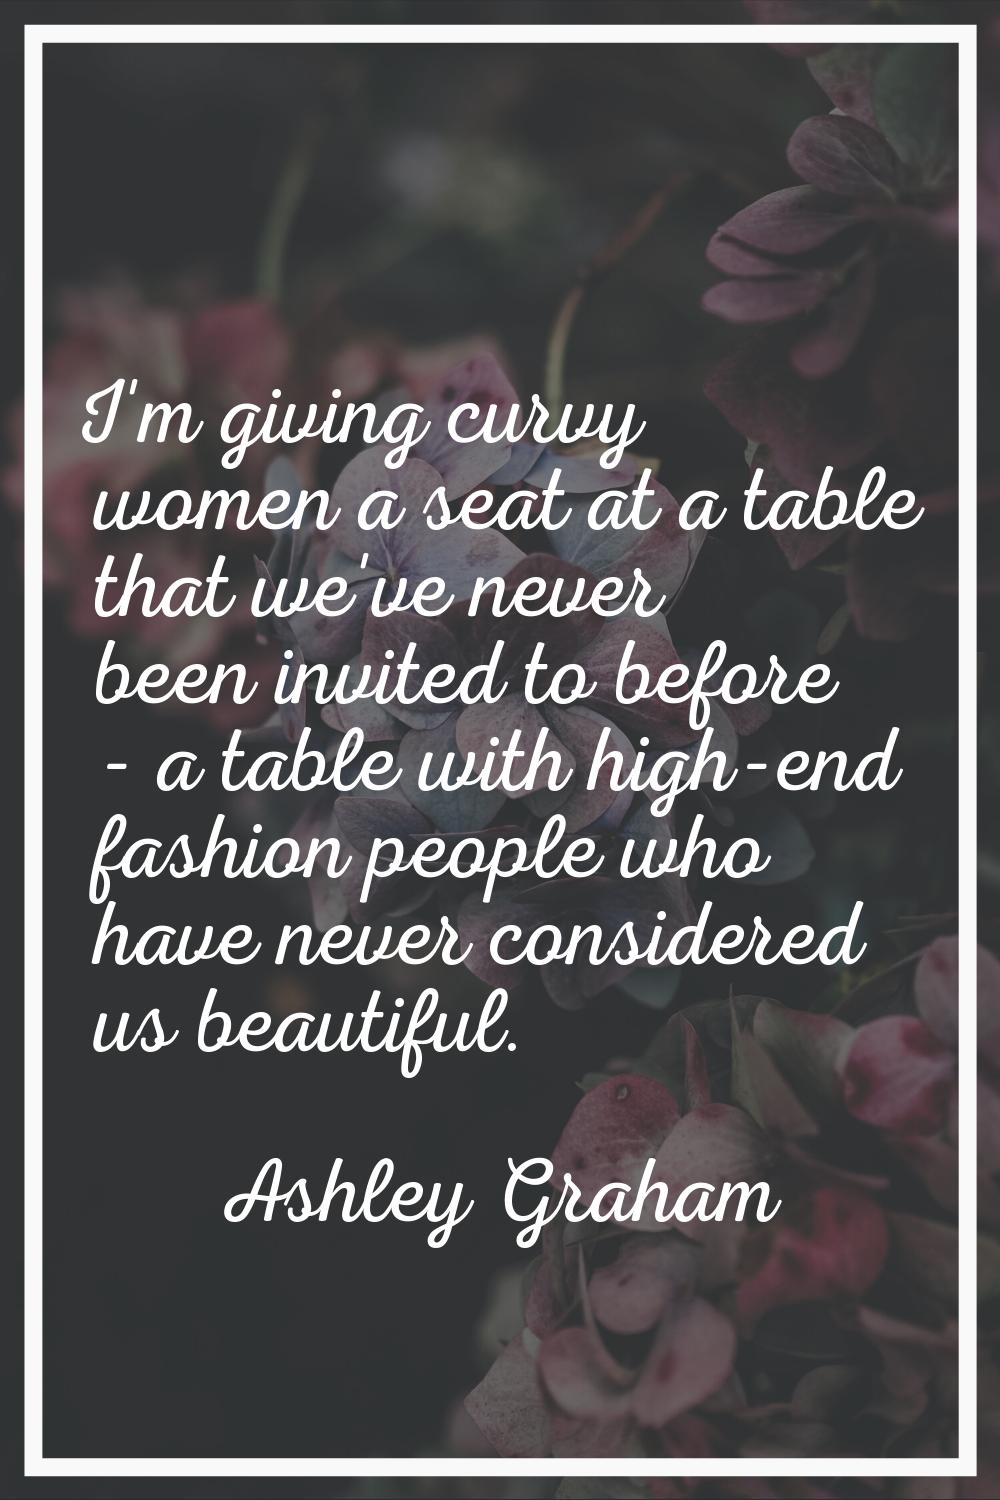 I'm giving curvy women a seat at a table that we've never been invited to before - a table with hig